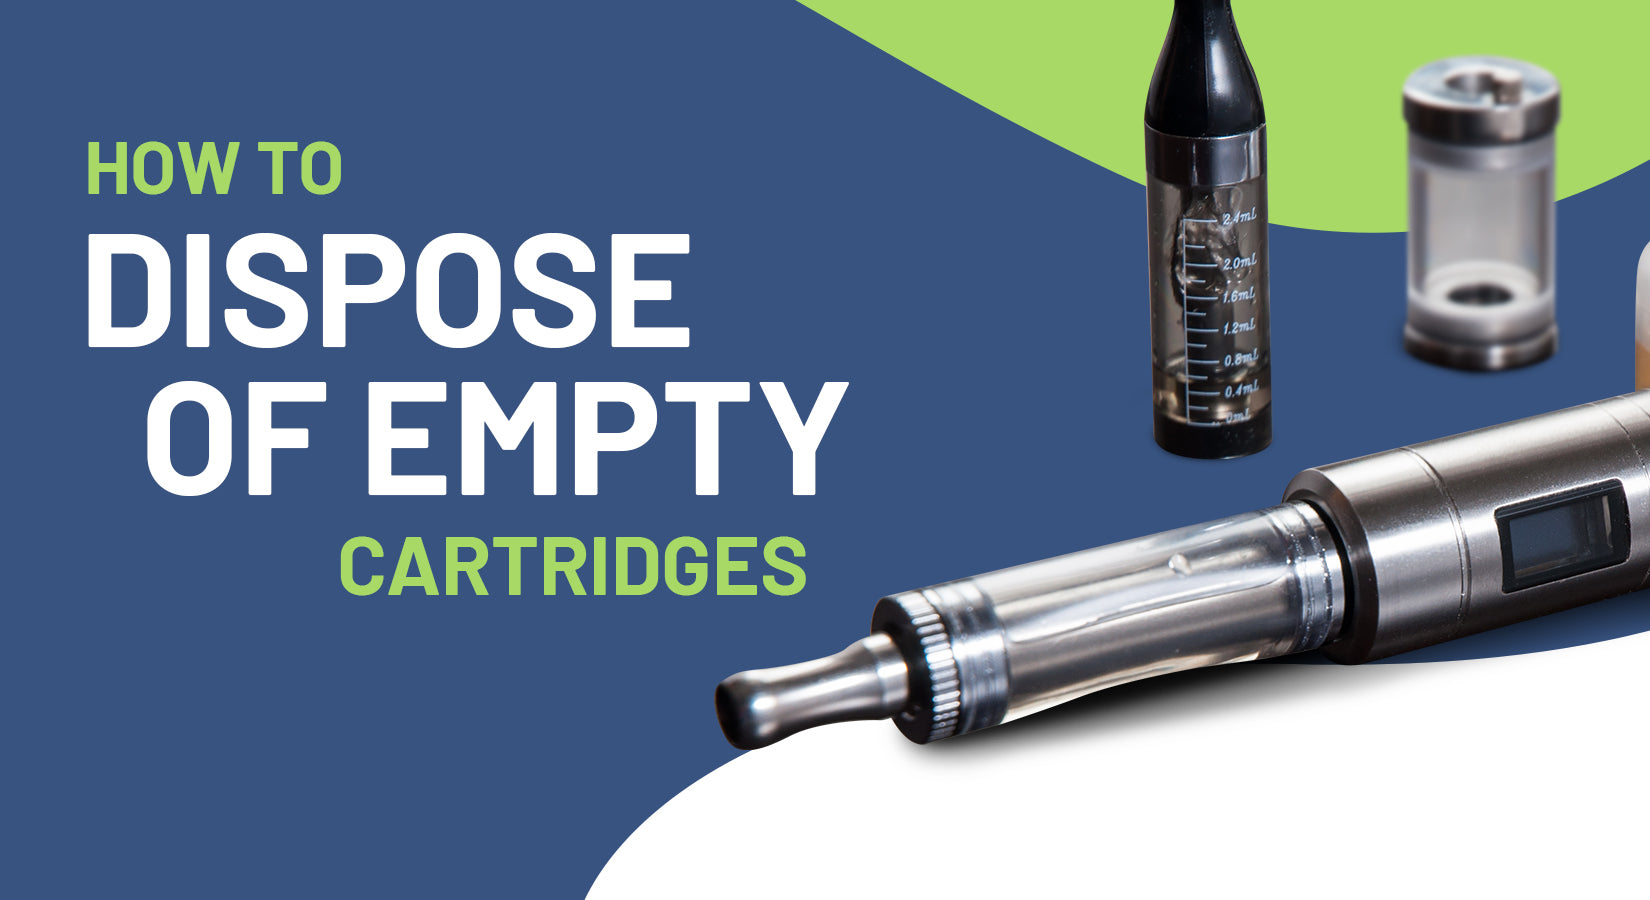 How to Dispose of Empty Vape Cartridges